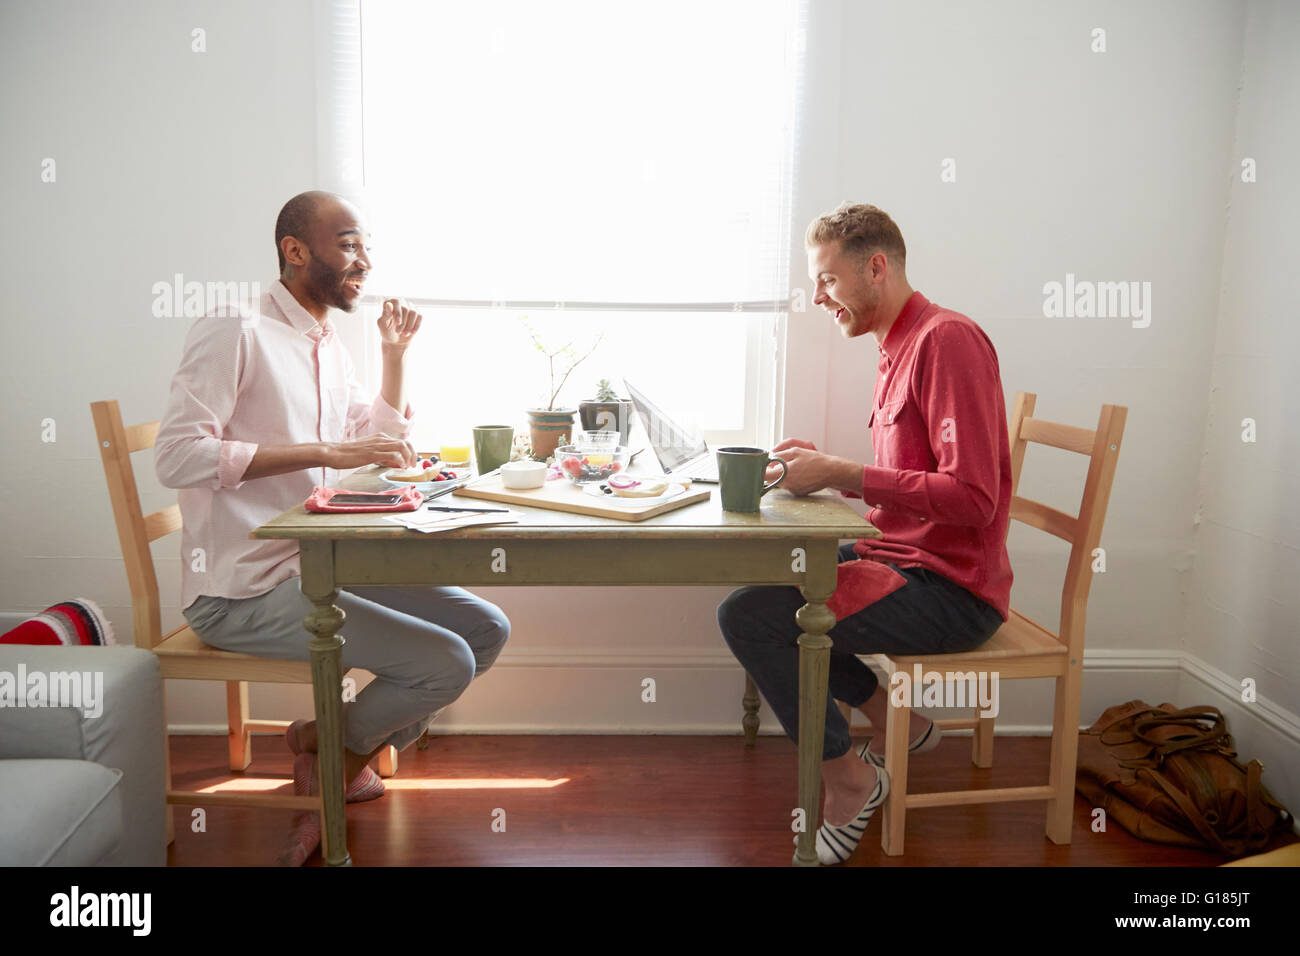 Side view of men sitting at dining table having breakfast laughing Stock Photo